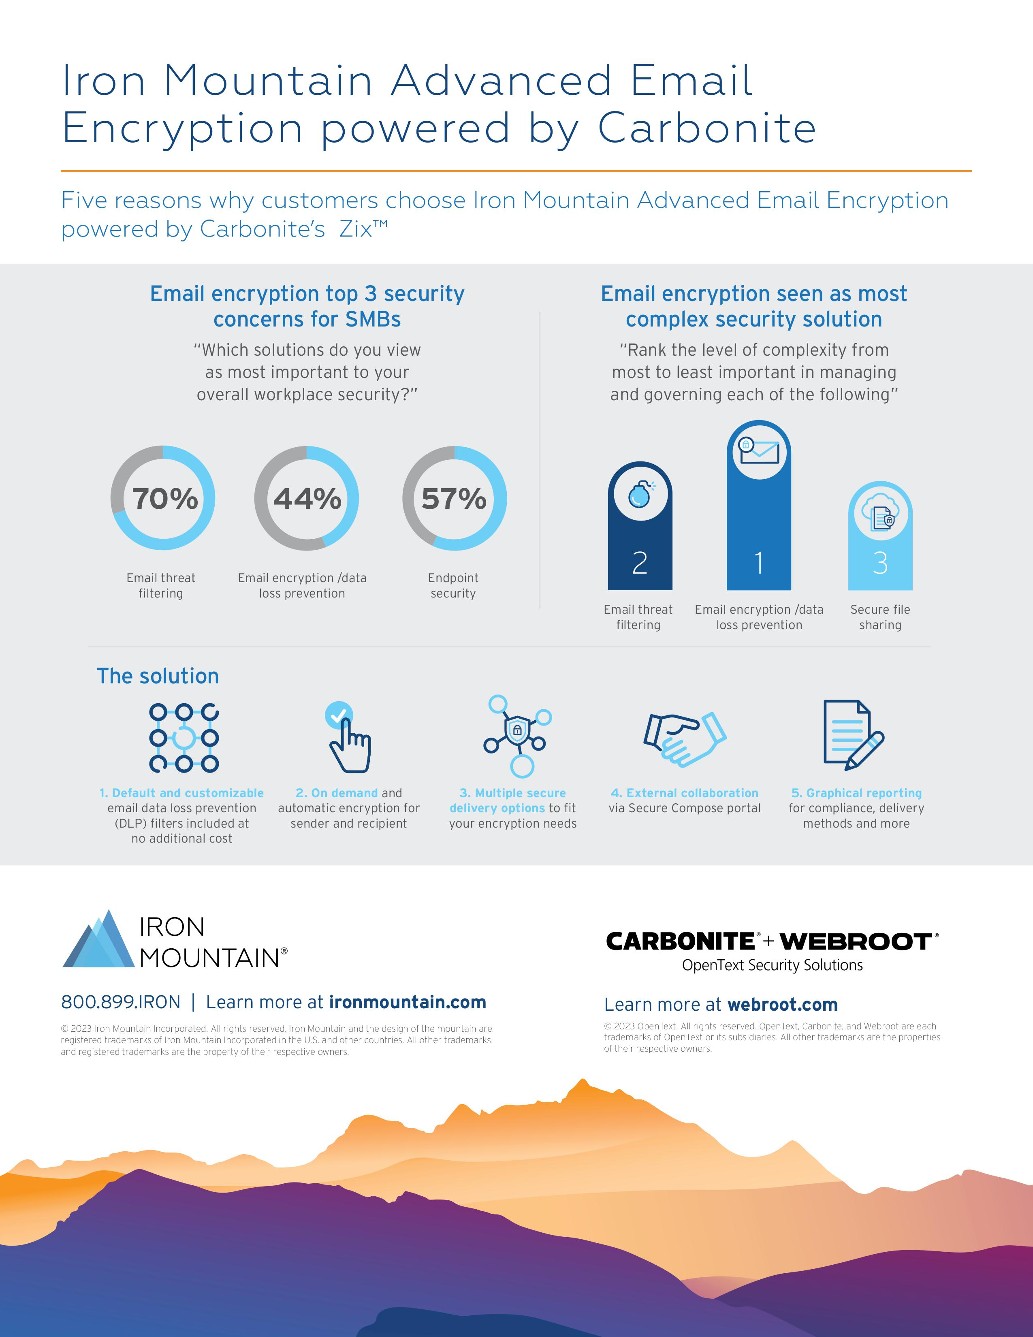 Why Choose Iron Mountain Advanced Email Encryption Powered By Carbonite's Zix™